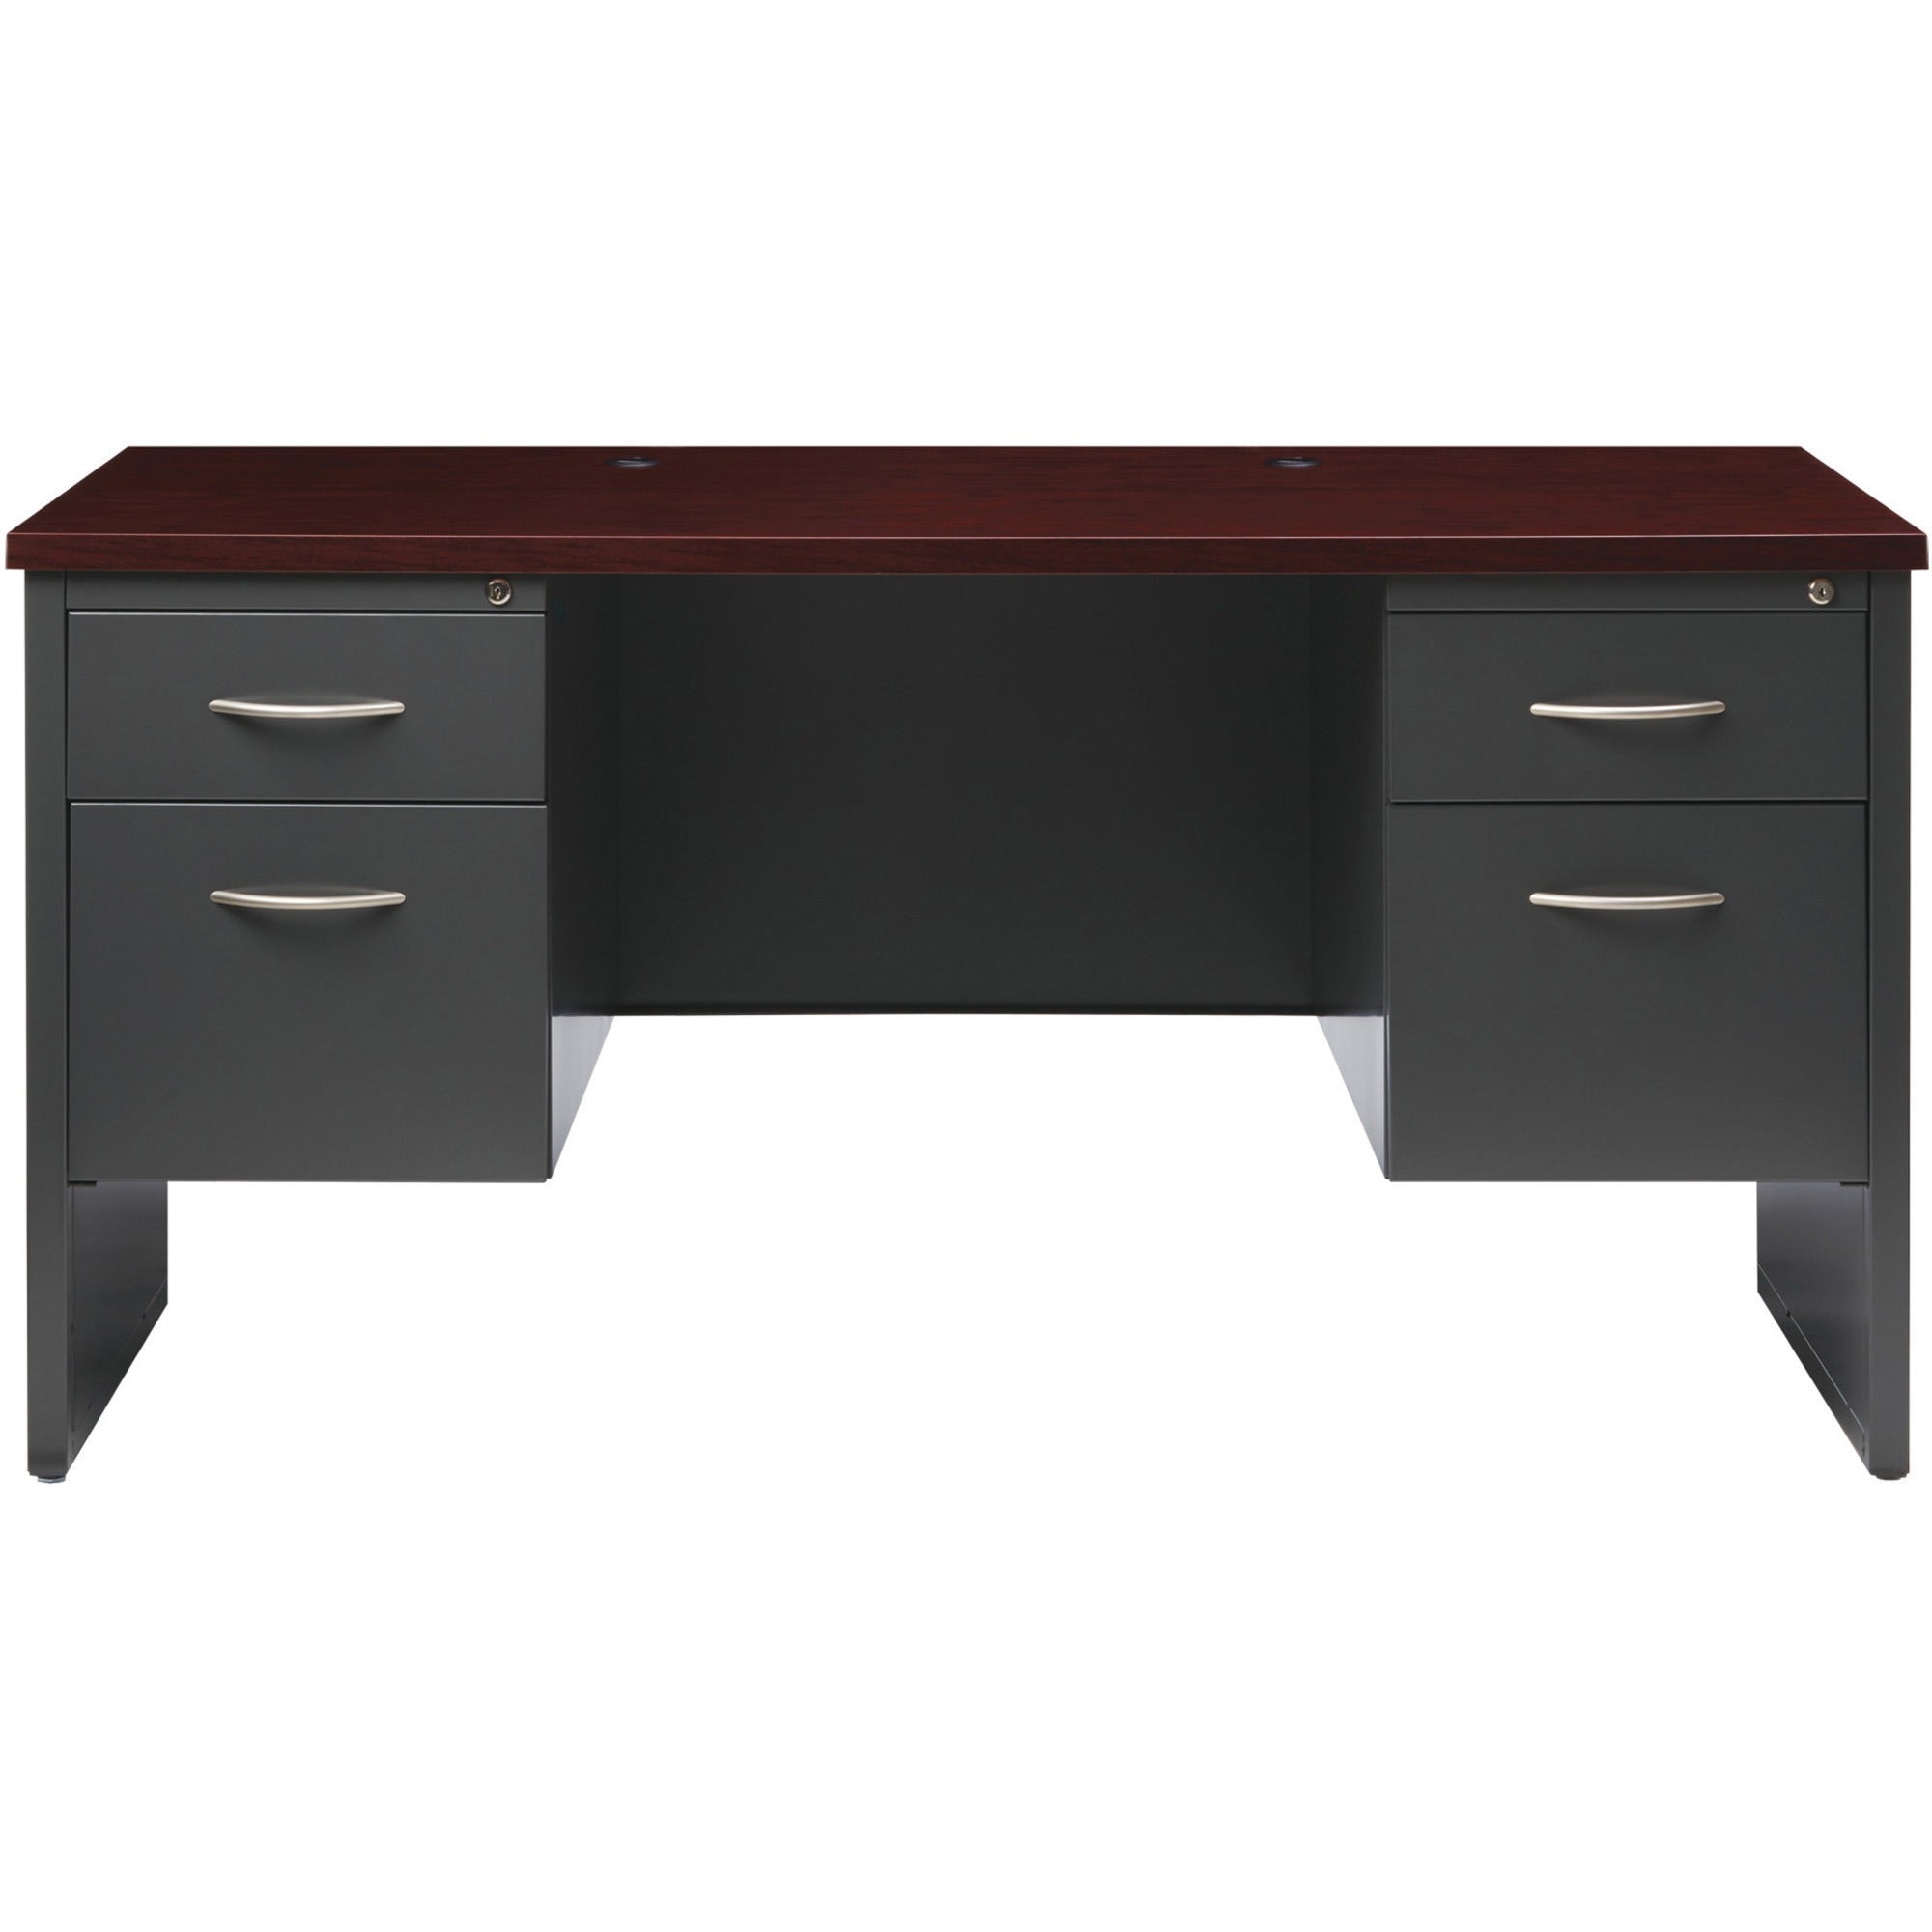 Lorell Fortress Modular Series Double-pedestal Credenza - 60" x 24" , 1.1" Top - 2 x Box, File Drawer(s) - Double Pedestal - Material: Steel - Finish: Mahogany Laminate, Charcoal - Scratch Resistant, Stain Resistant, Ball-bearing Suspension, Grommet, - 